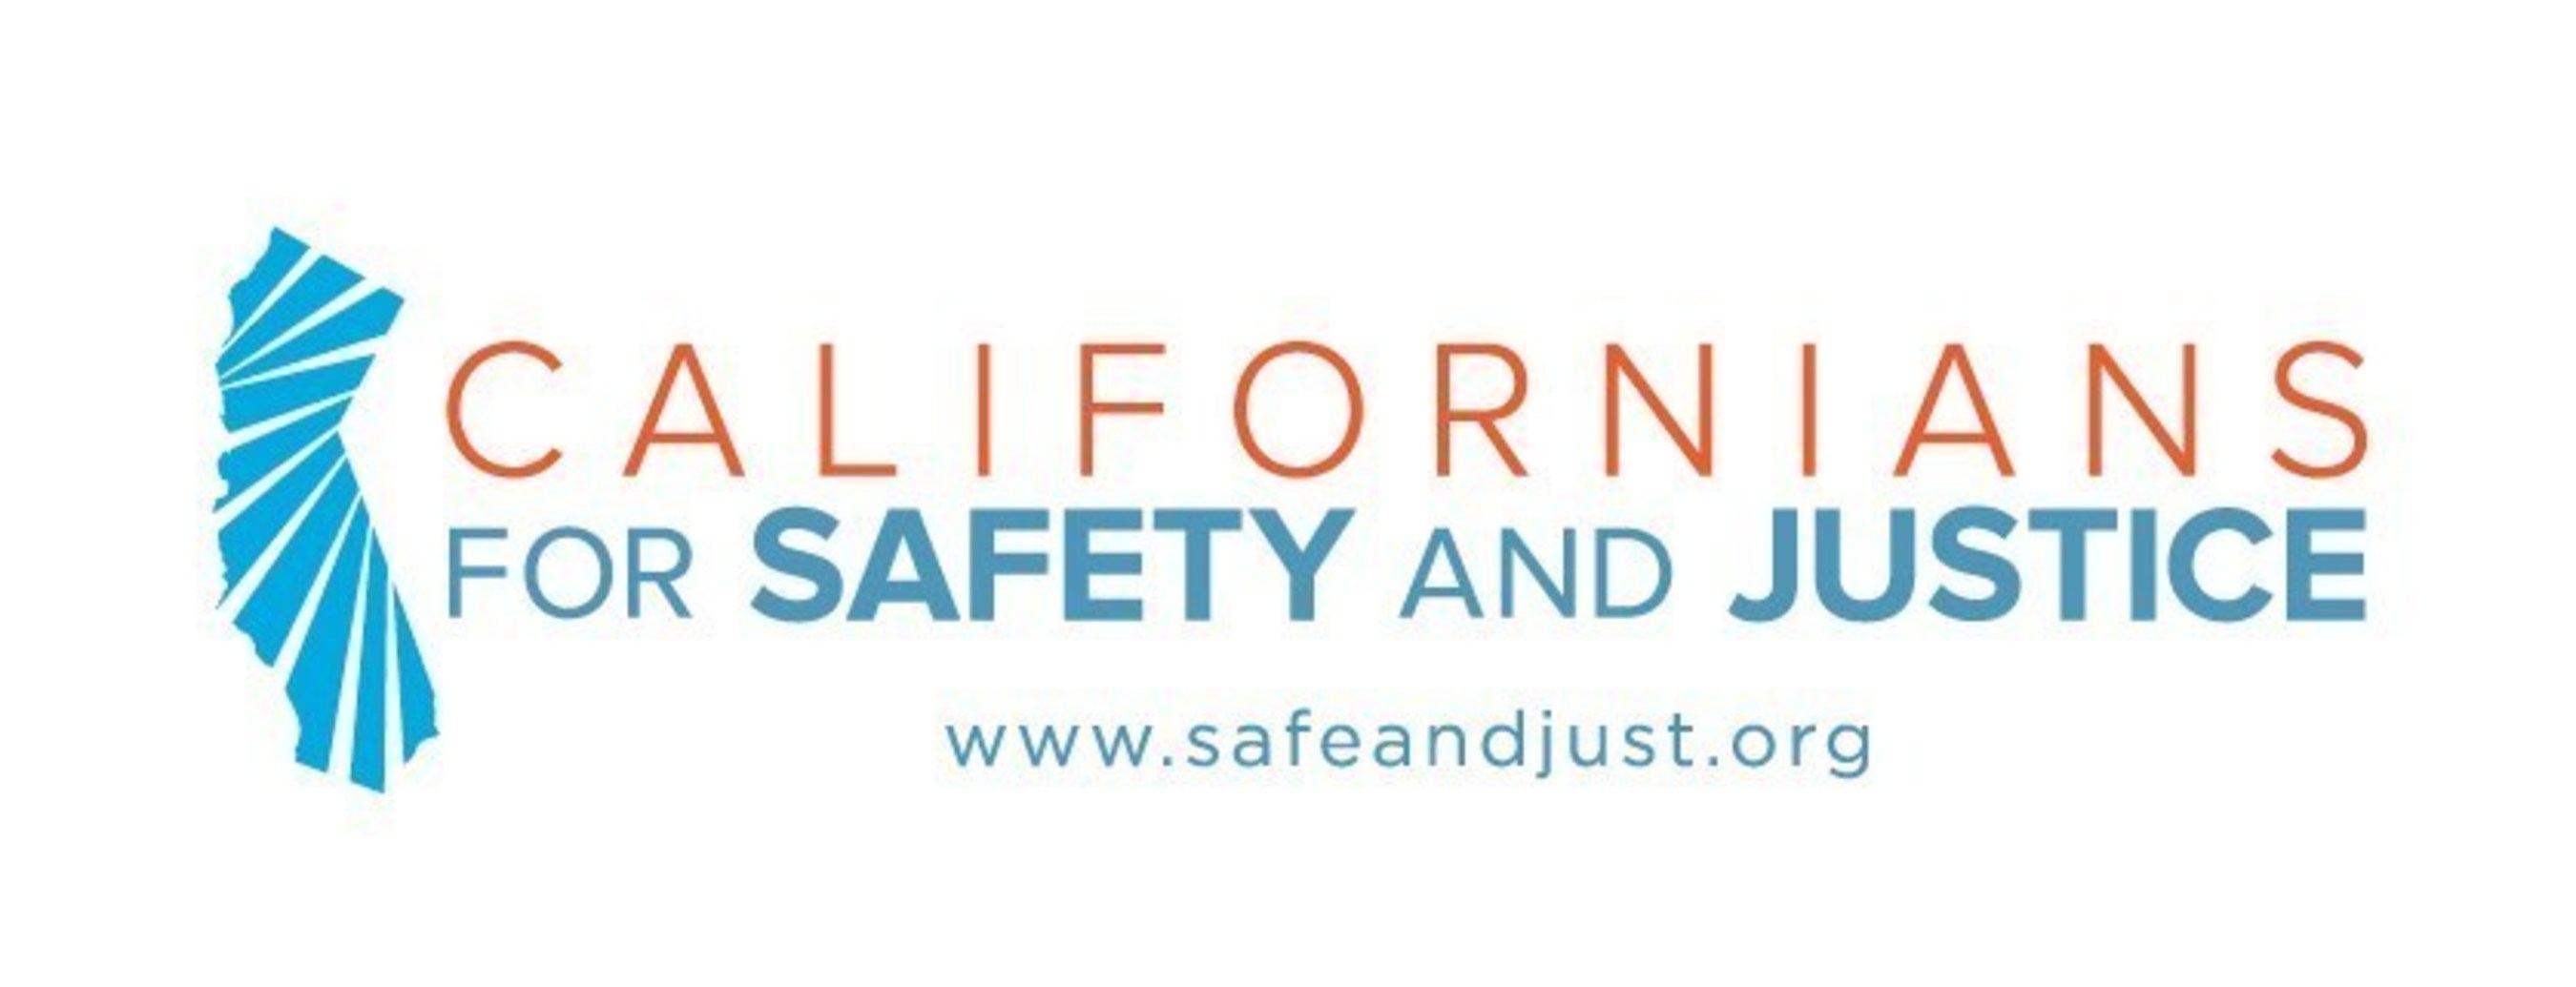 Californians for Safety and Justice Logo